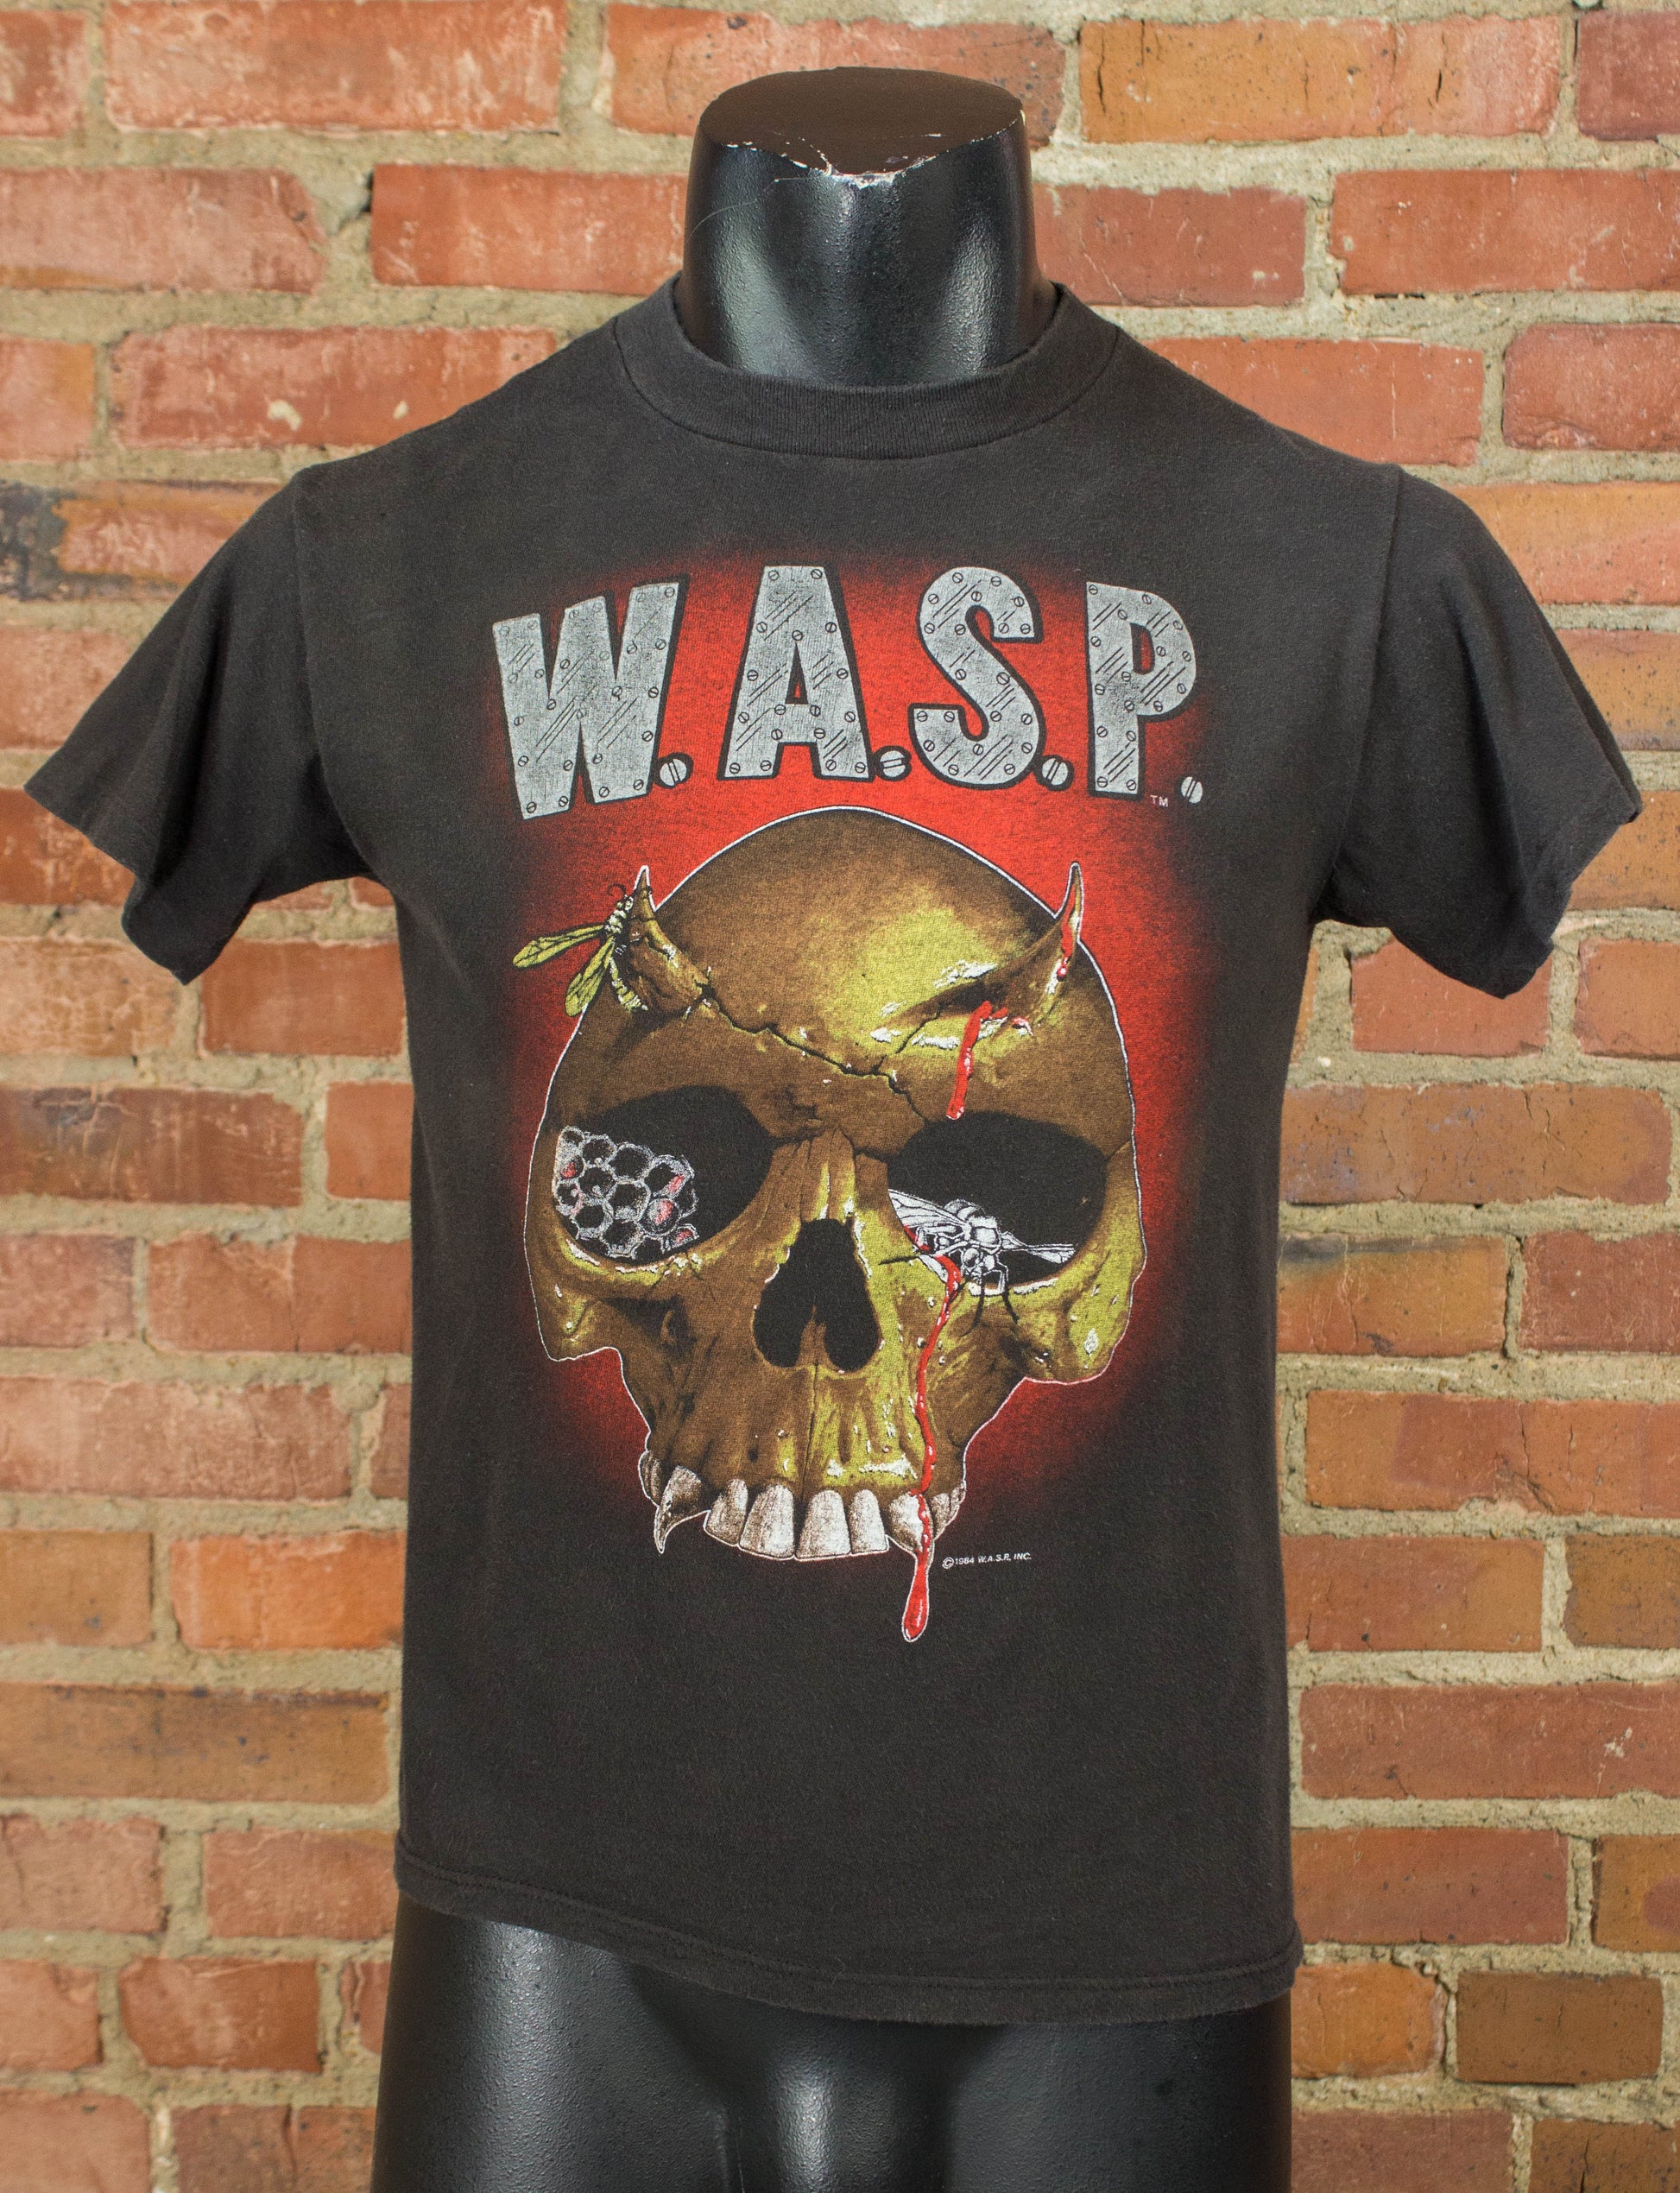 Vintage WASP Concert T Shirt 1984 Winged Assassin's Tour Black Small